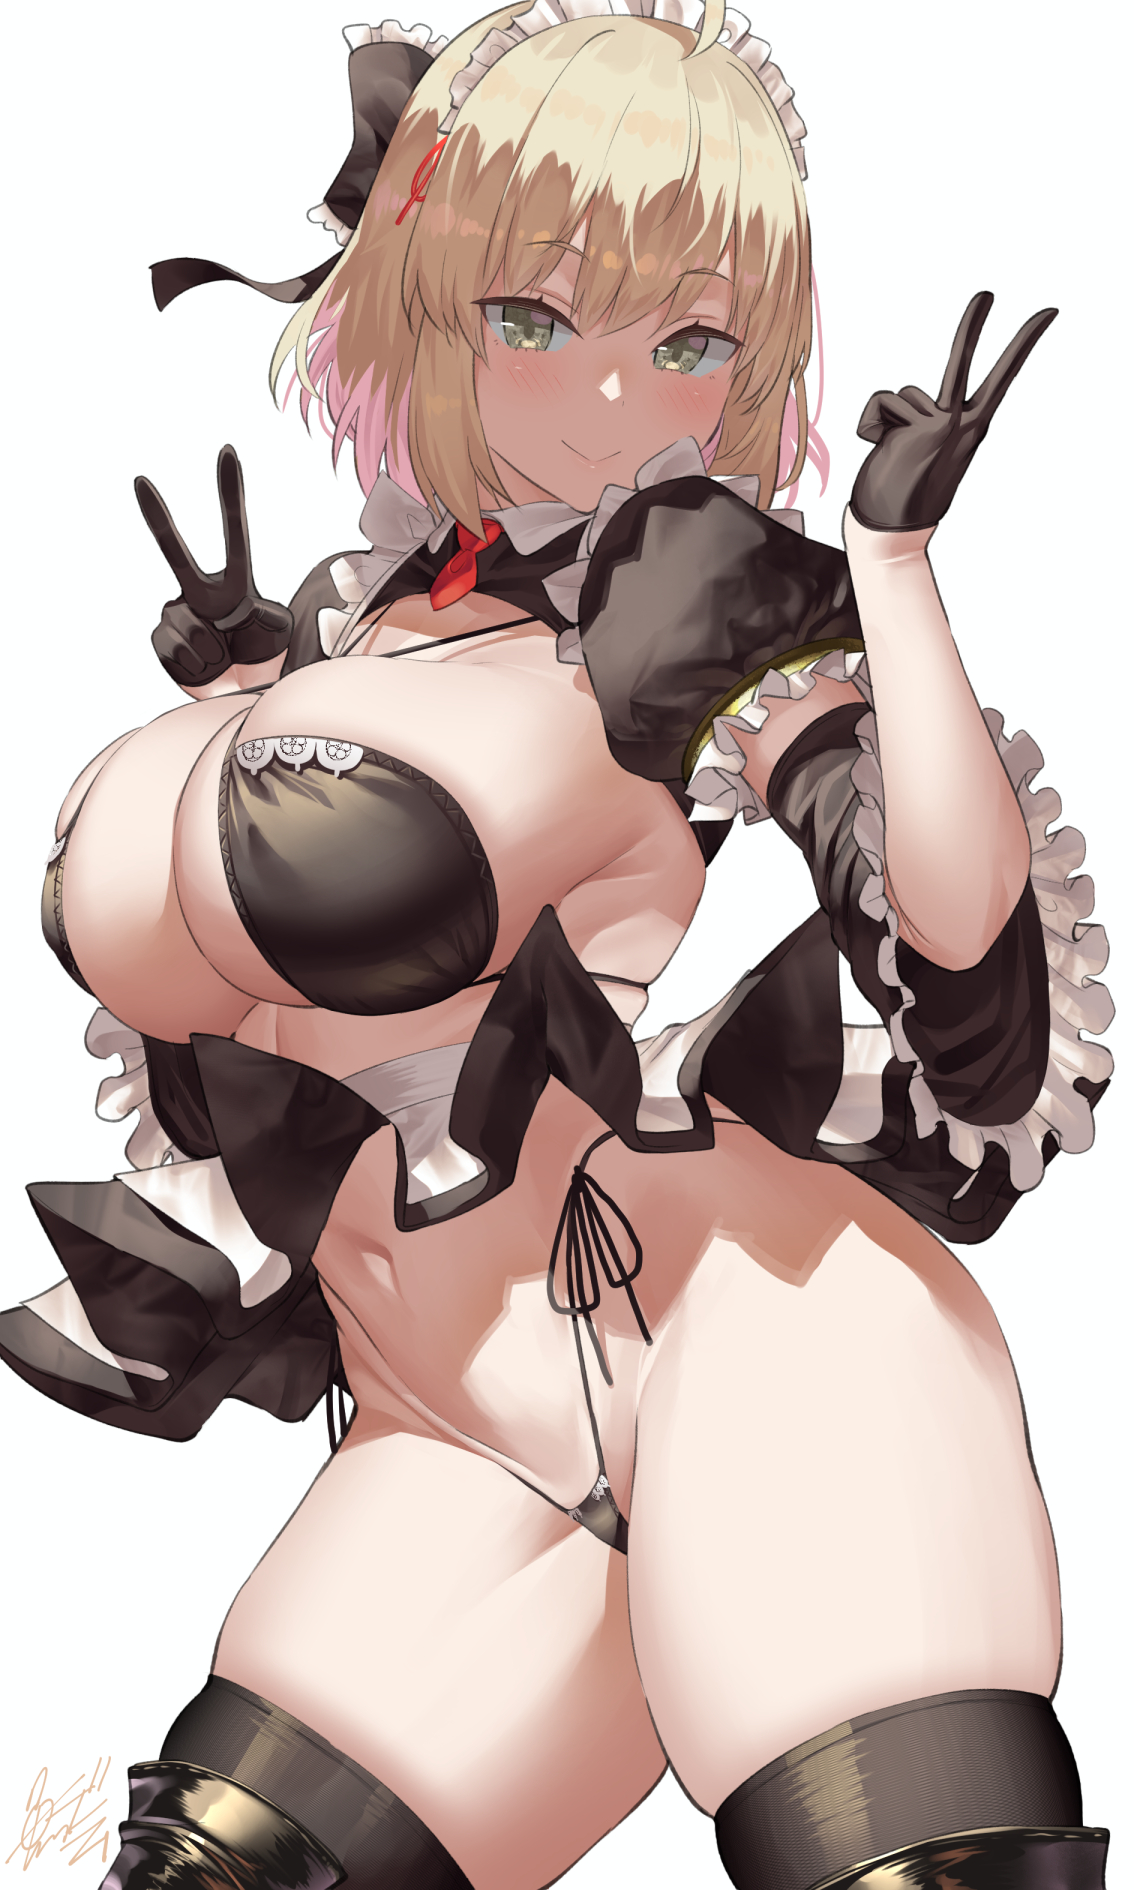 Anime 1134x1890 anime anime girls big boobs curvy Uo Denim artwork Okita Souji Fate series Fate/Grand Order blonde green eyes smiling maid outfit maid bikini huge breasts looking at viewer wide hips thigh-highs white background